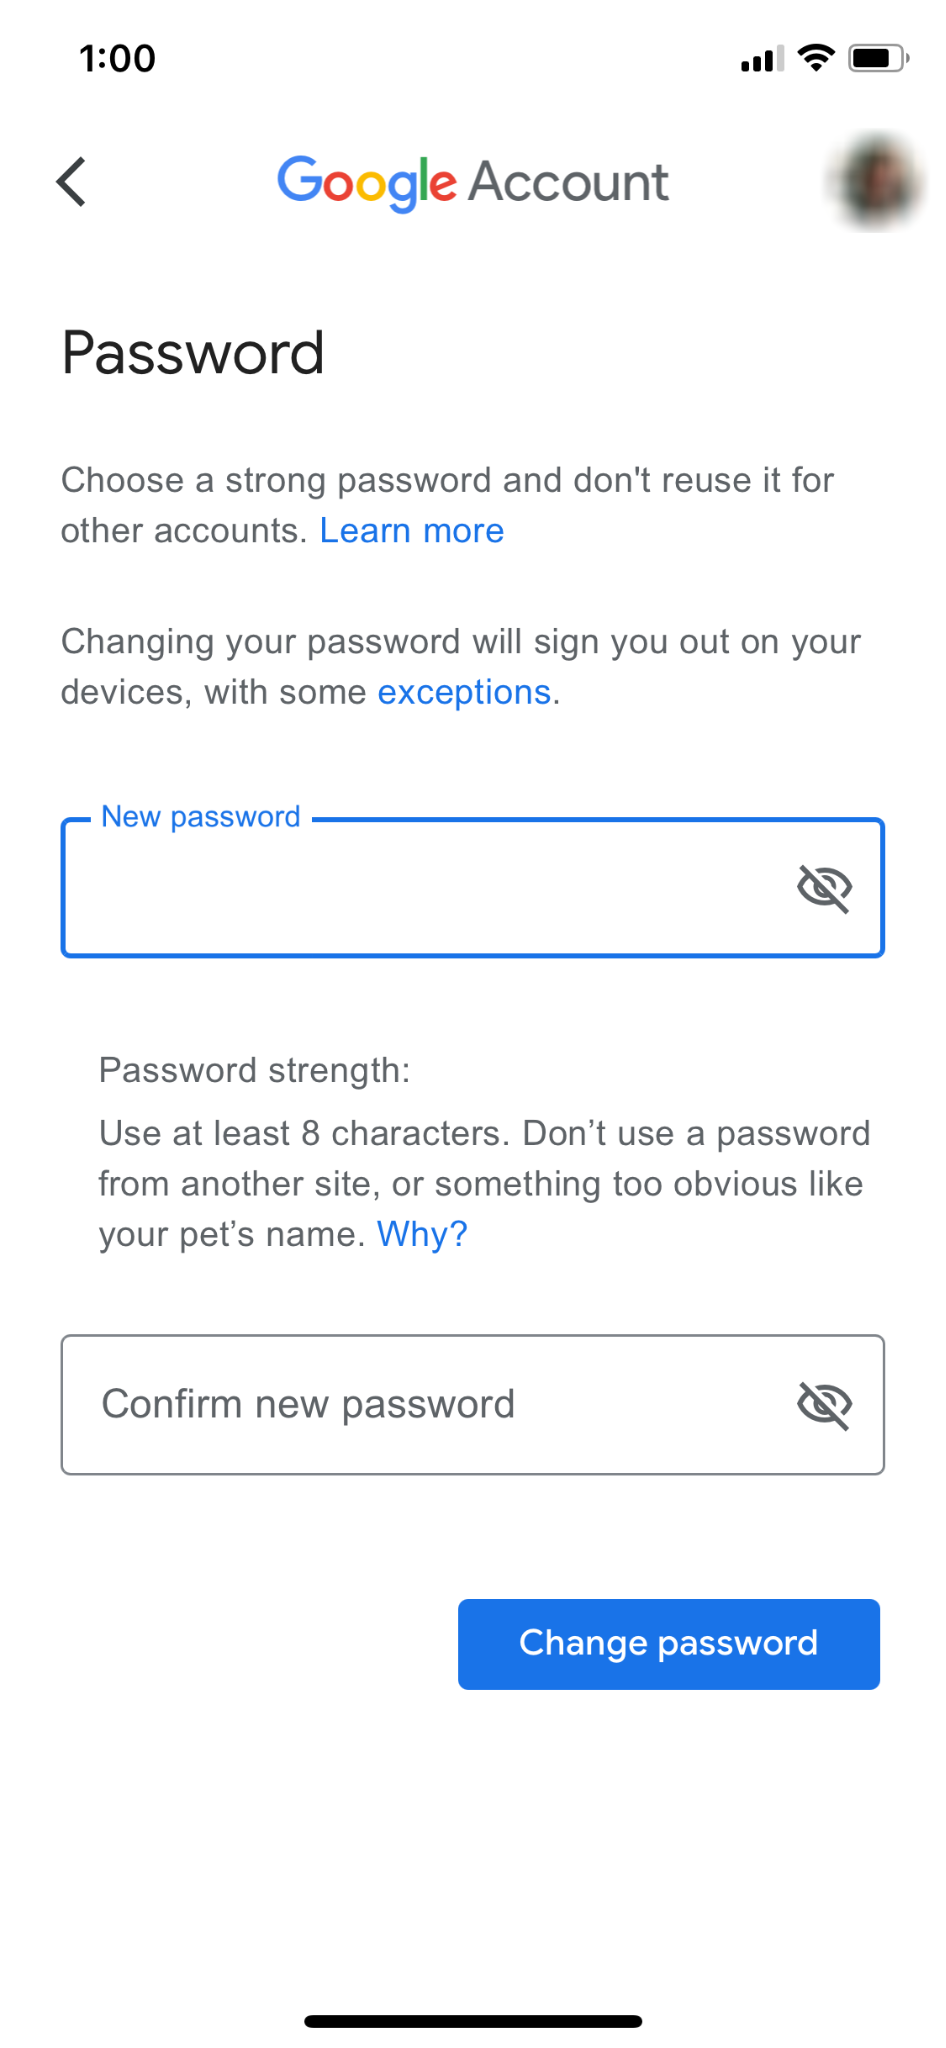 Select-a-new-password-and-click-“Change-password”